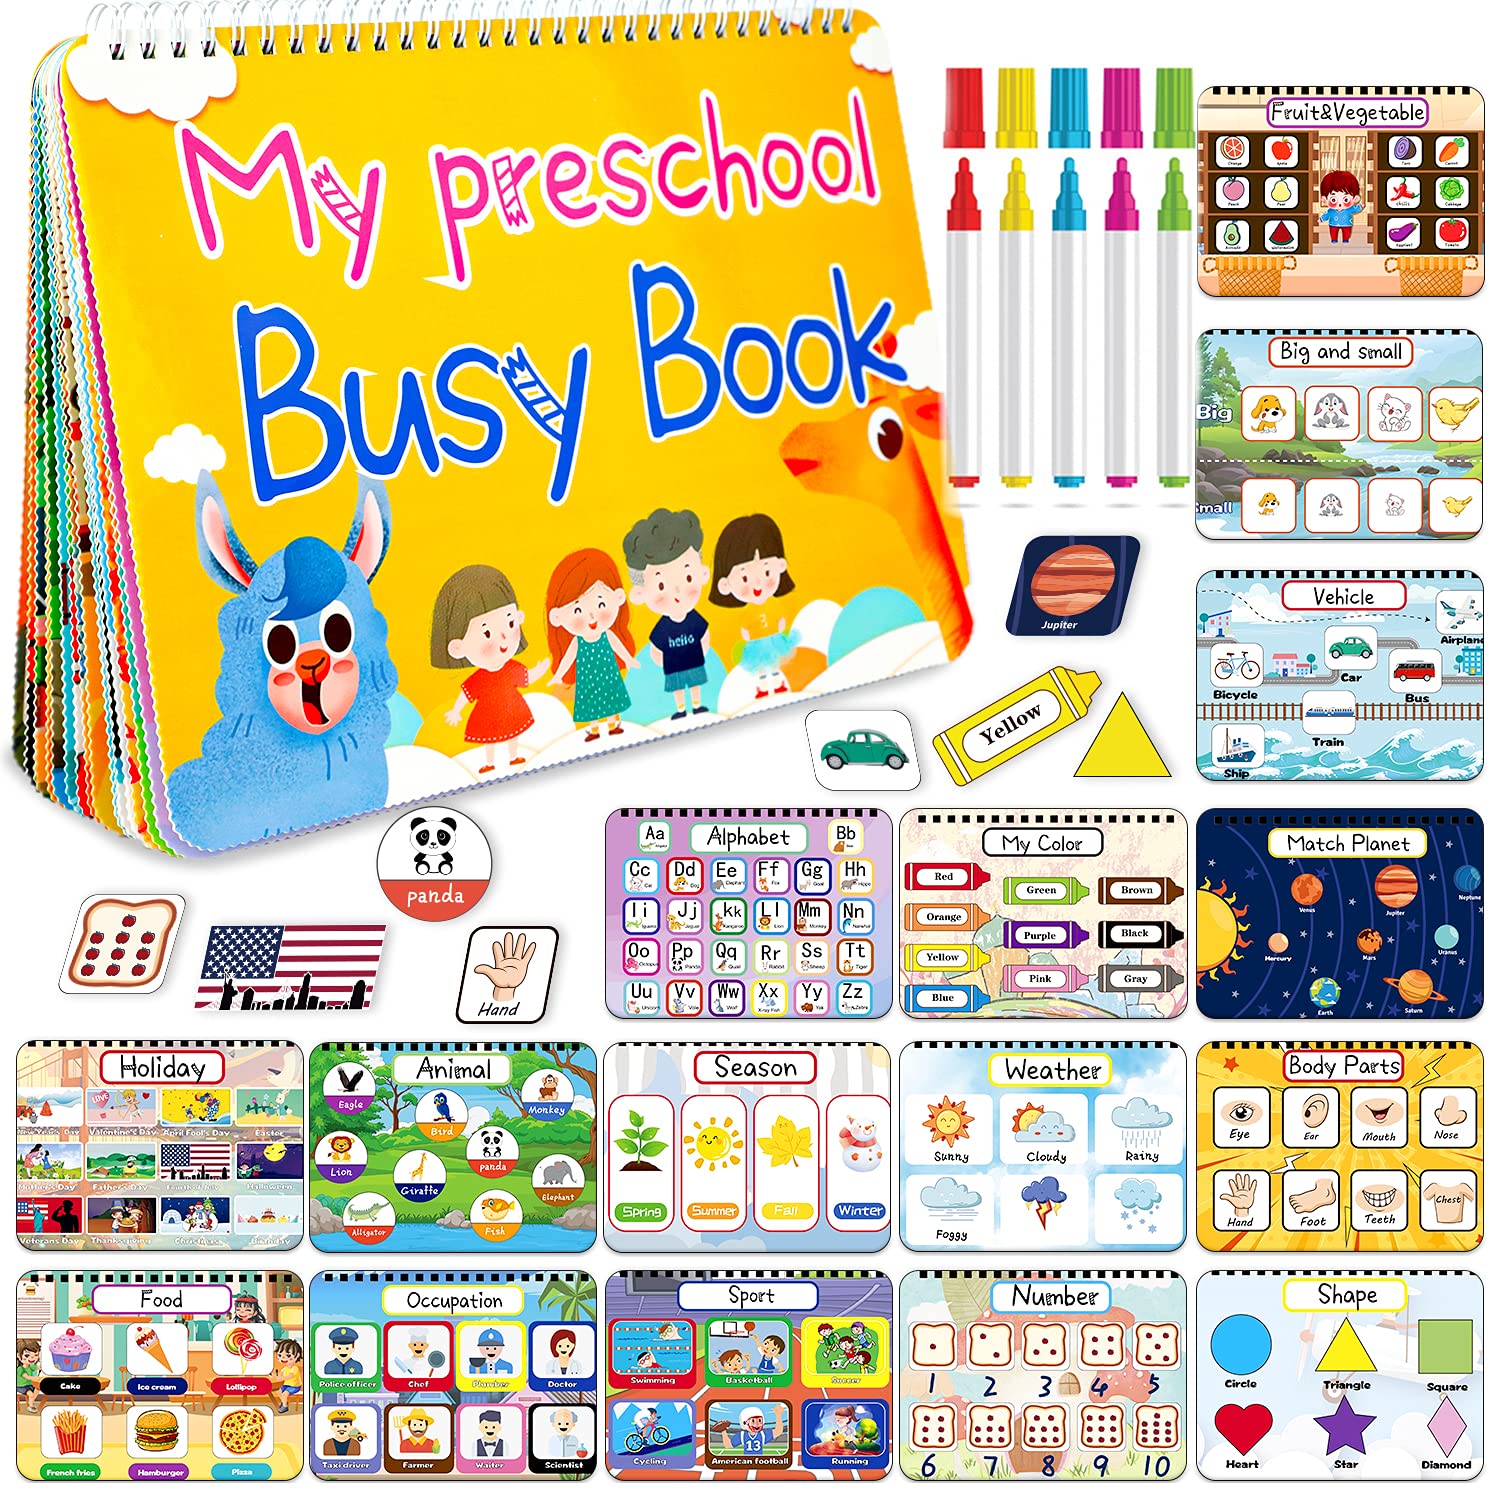 HeyKiddo Toddler Busy Book, Autism Toys for Kids, Preschool Learning Activity Binder, 16 Themes with Colorful Pages, Educational Book for Autism & Special Needs, Drawing Book for Home School Learning